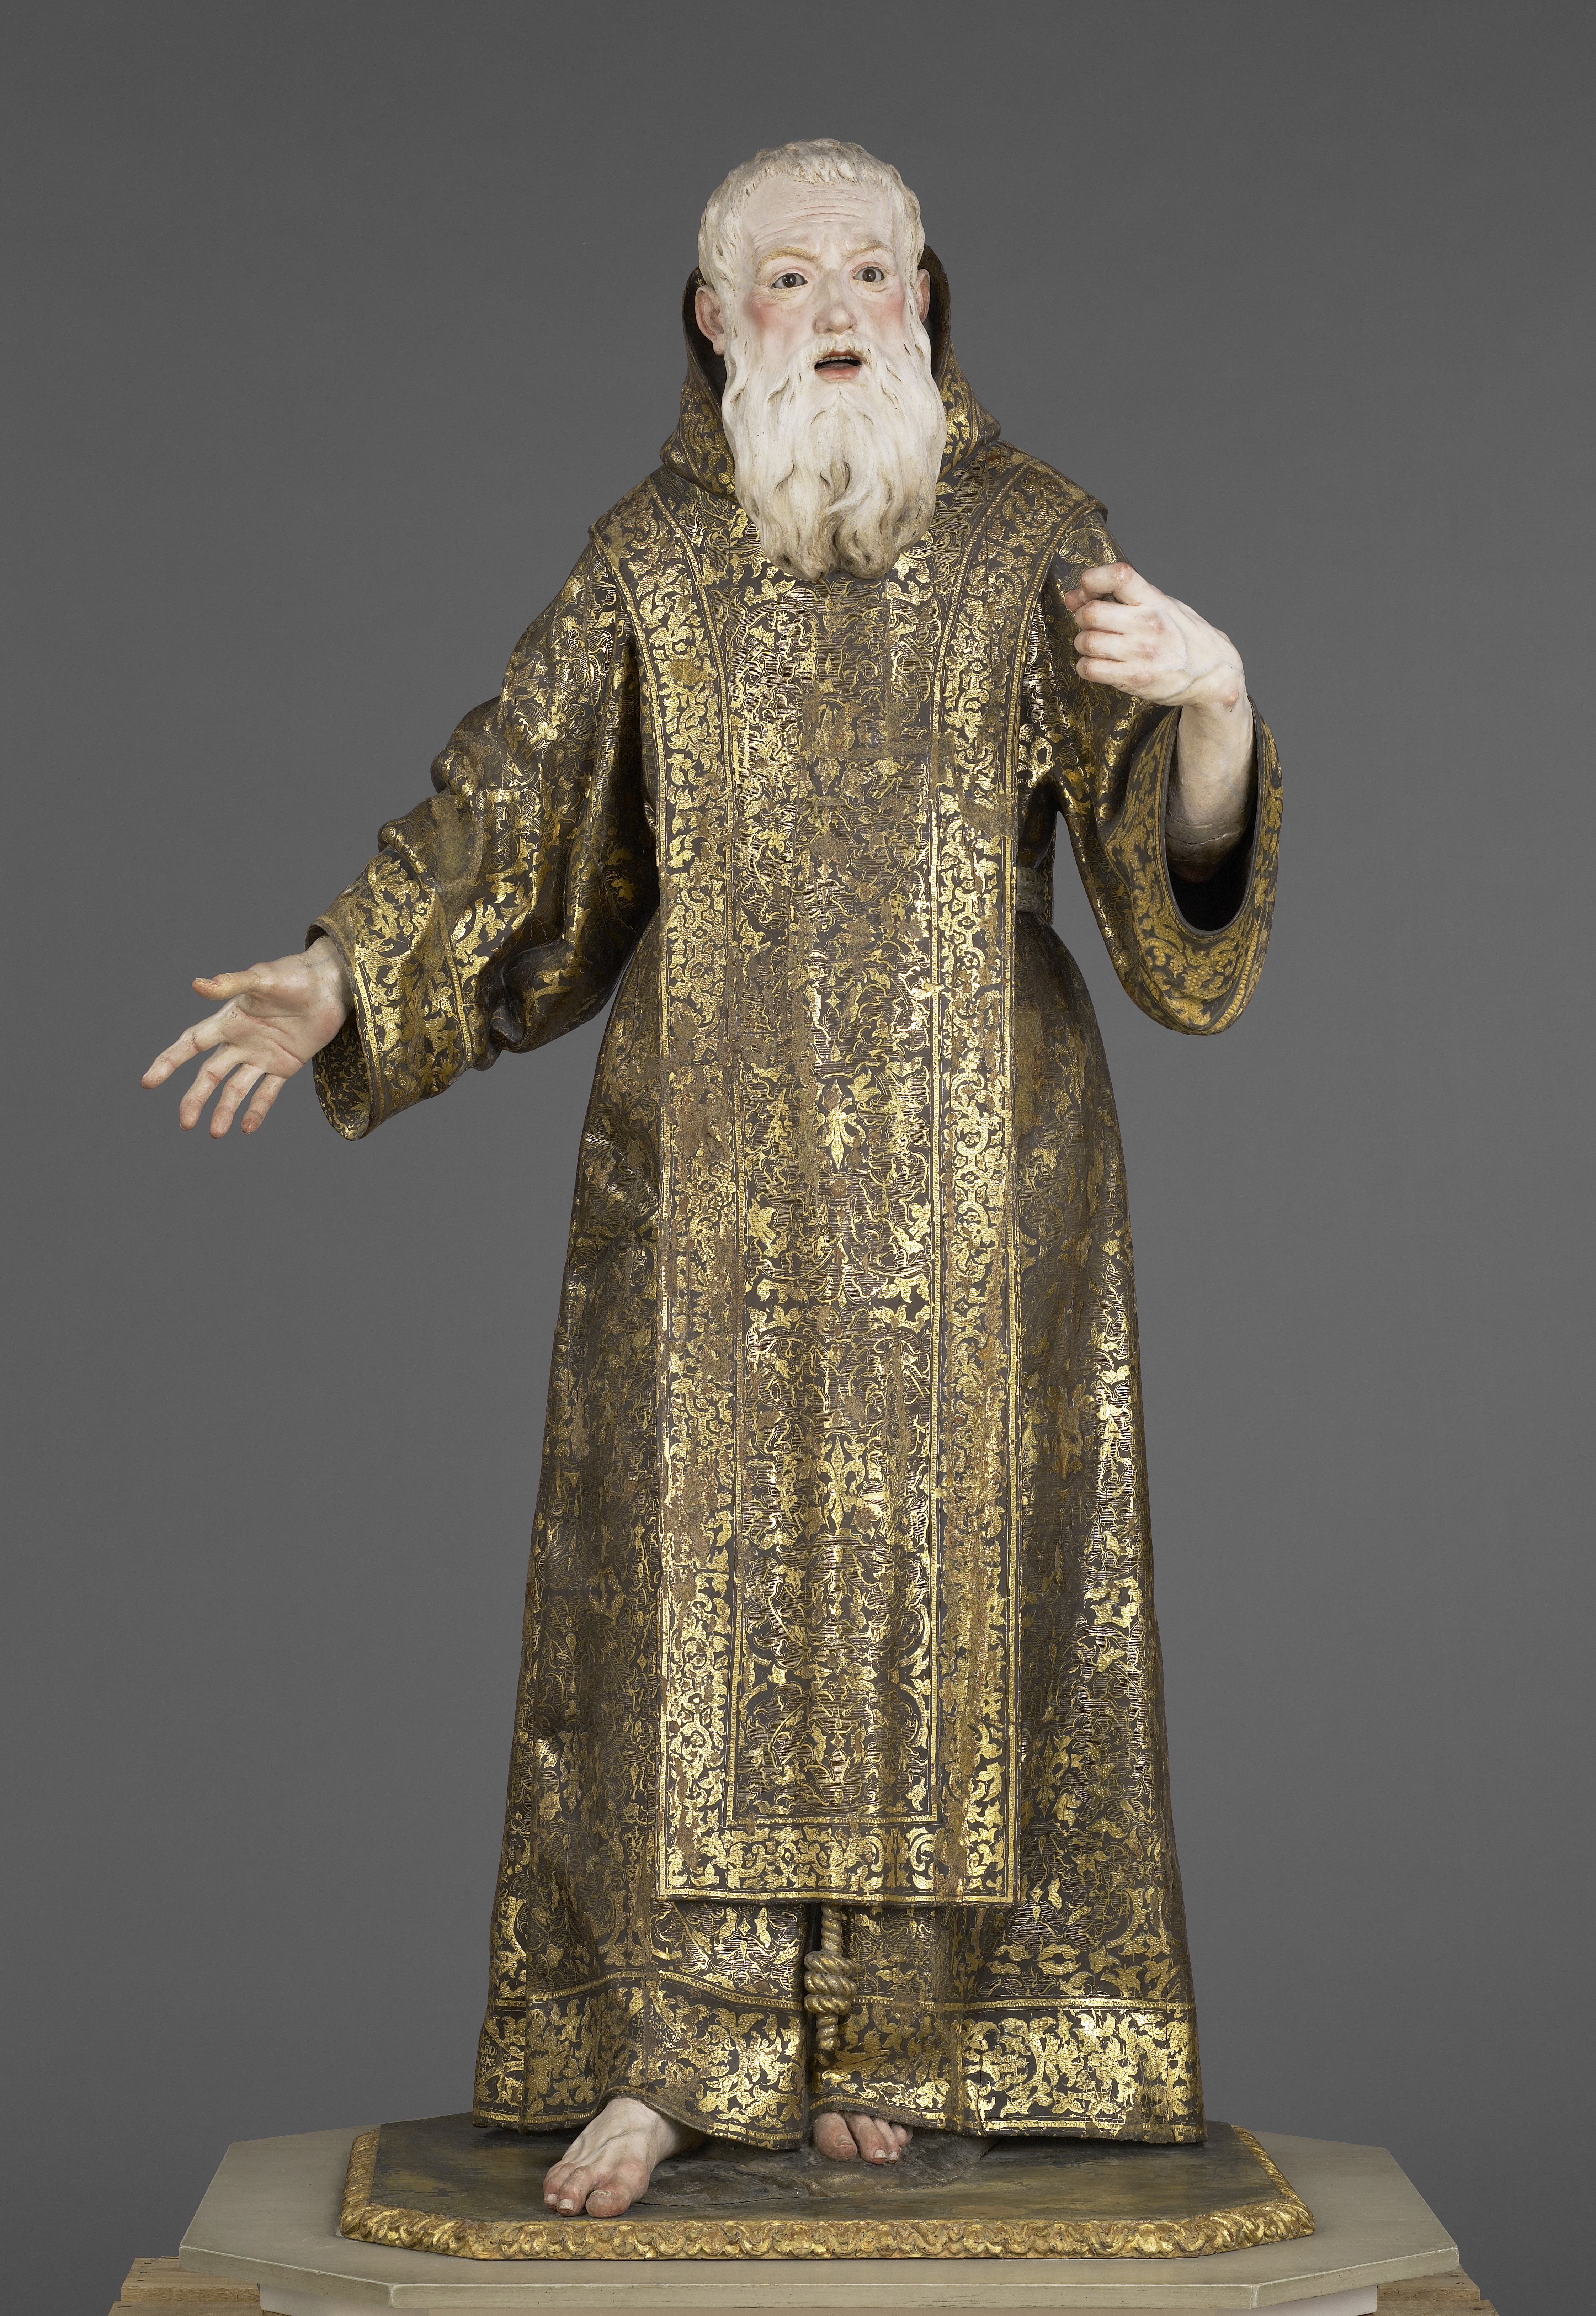 A polychrome wood sculpture of an older man standing, wearing a long gold embellished robe with a hood. He has white hair and a long white beard and he holds out his hands as though he is speaking. His lips are parted and his eyebrows are raised. Despite his elaborate robe, he is barefoot.